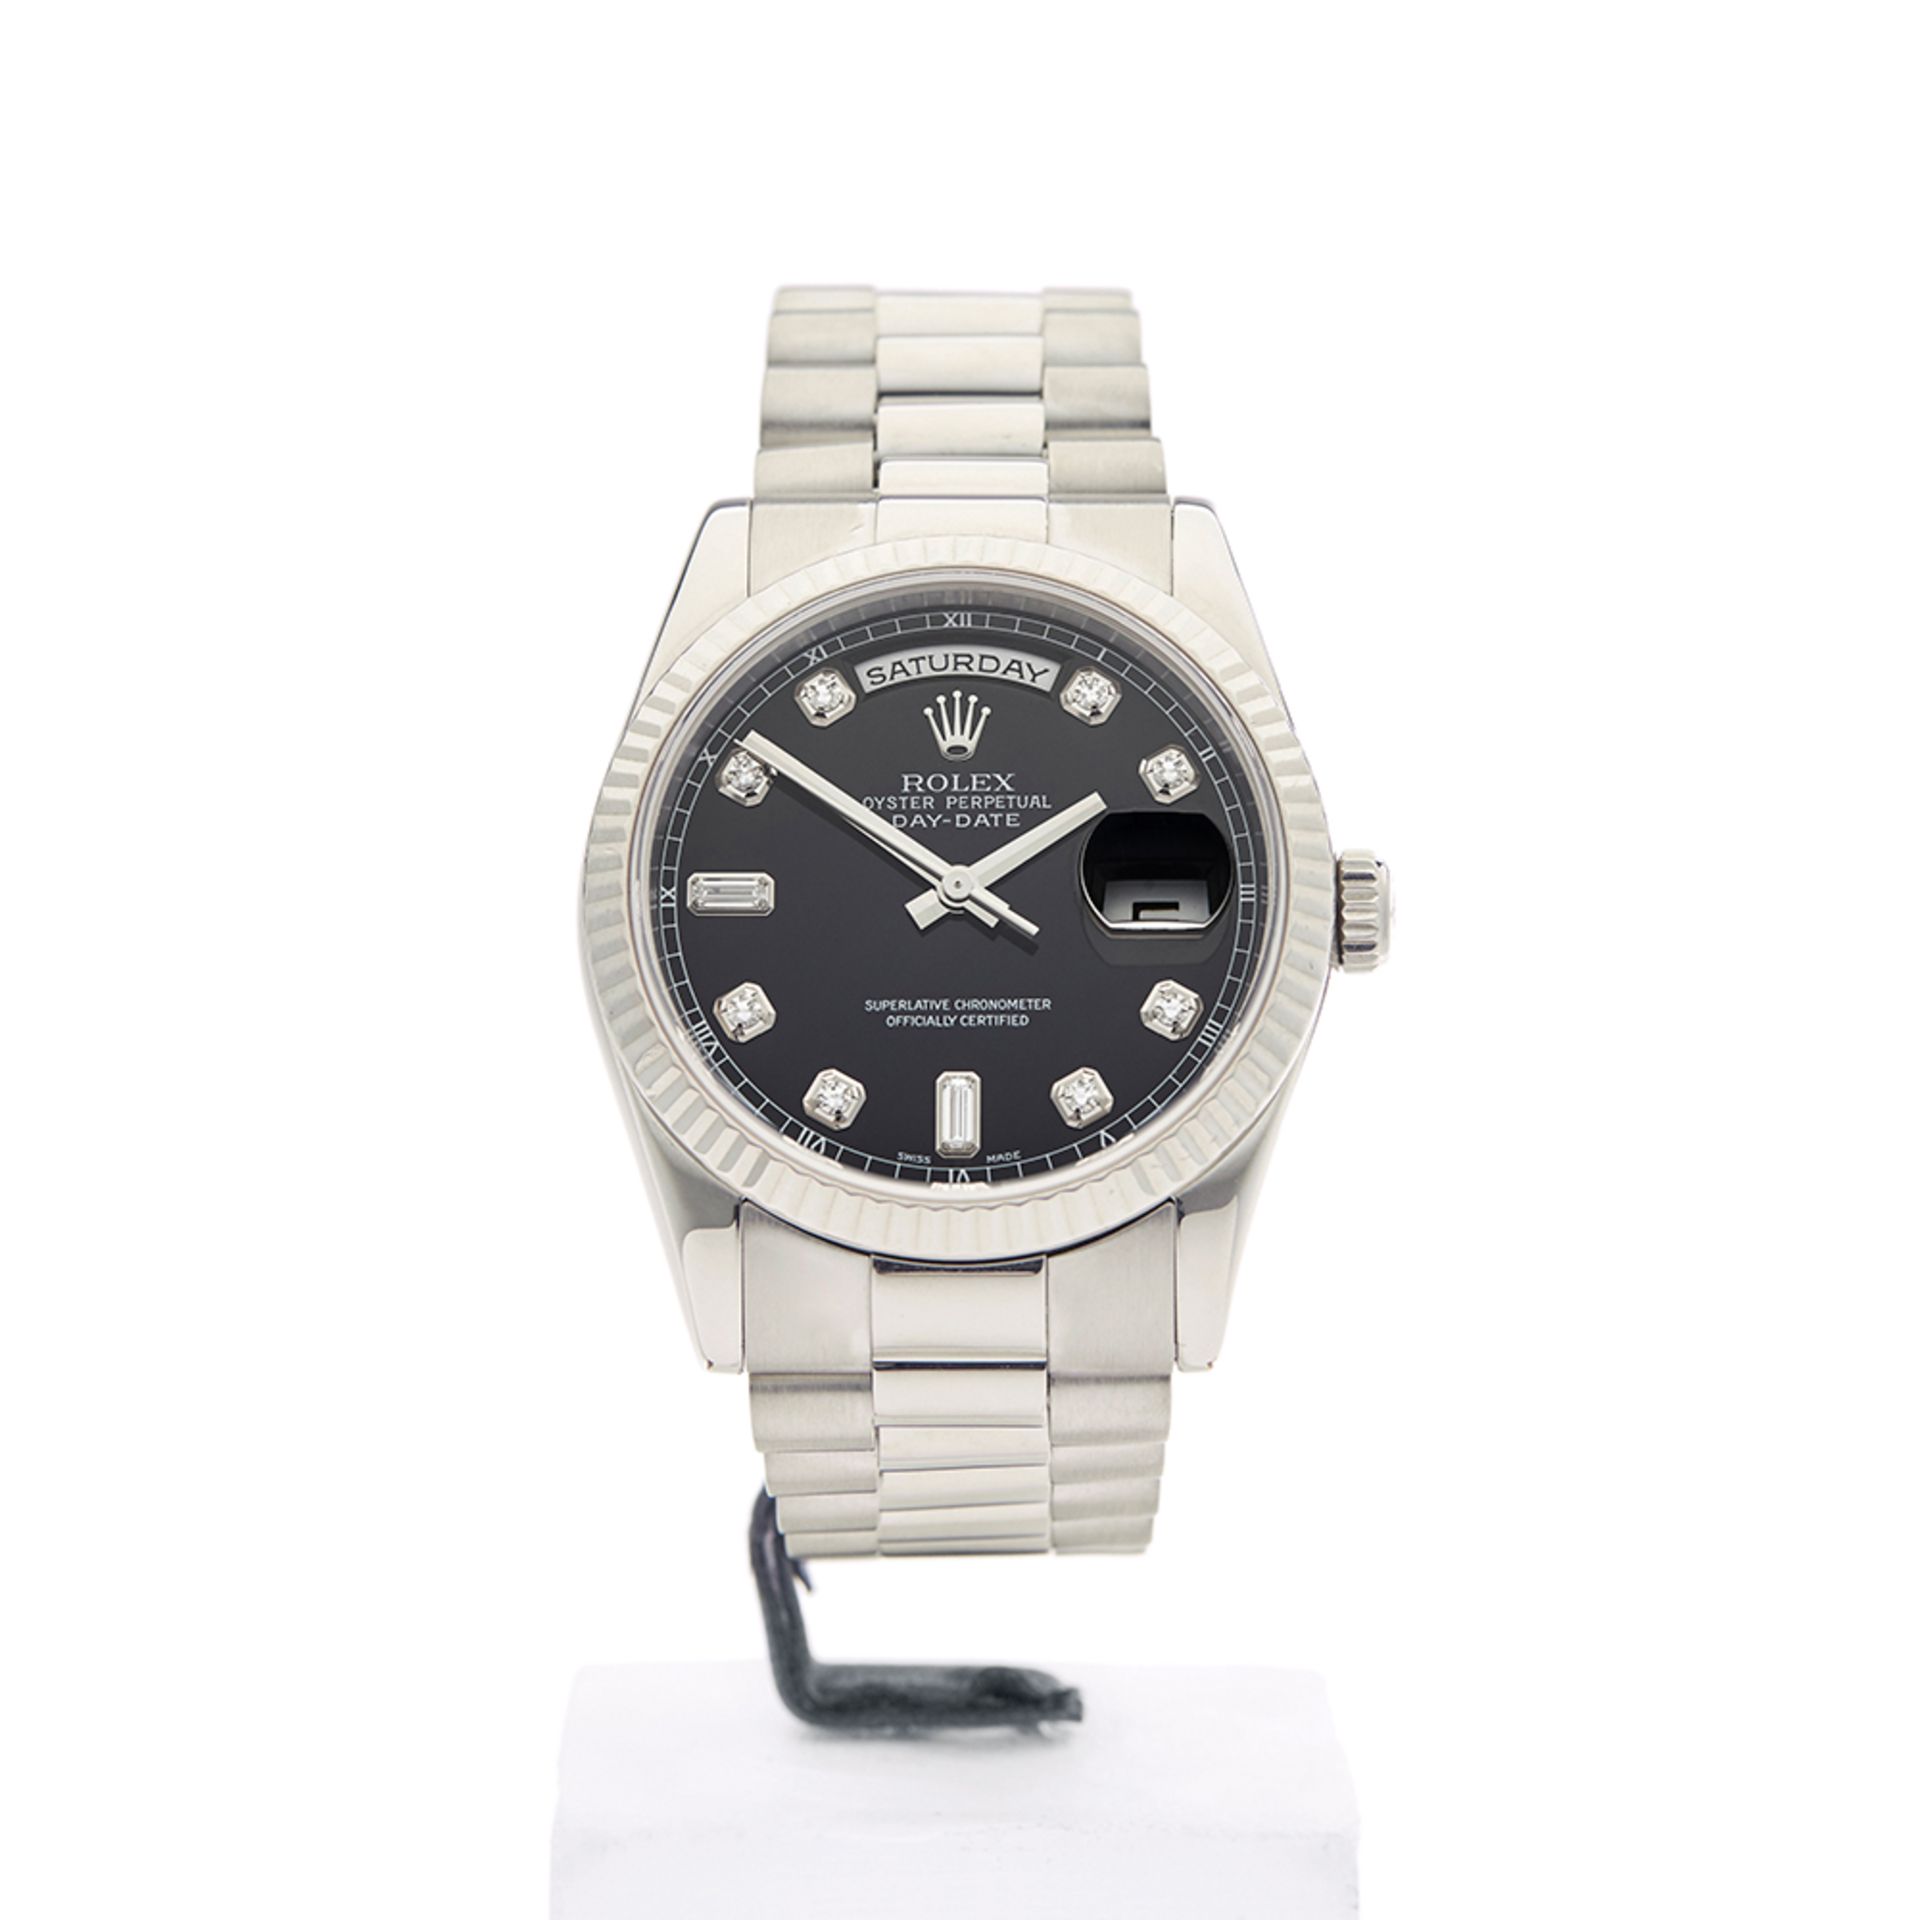 Rolex Day-Date 36mm 18k White Gold - 118239 - Image 2 of 9